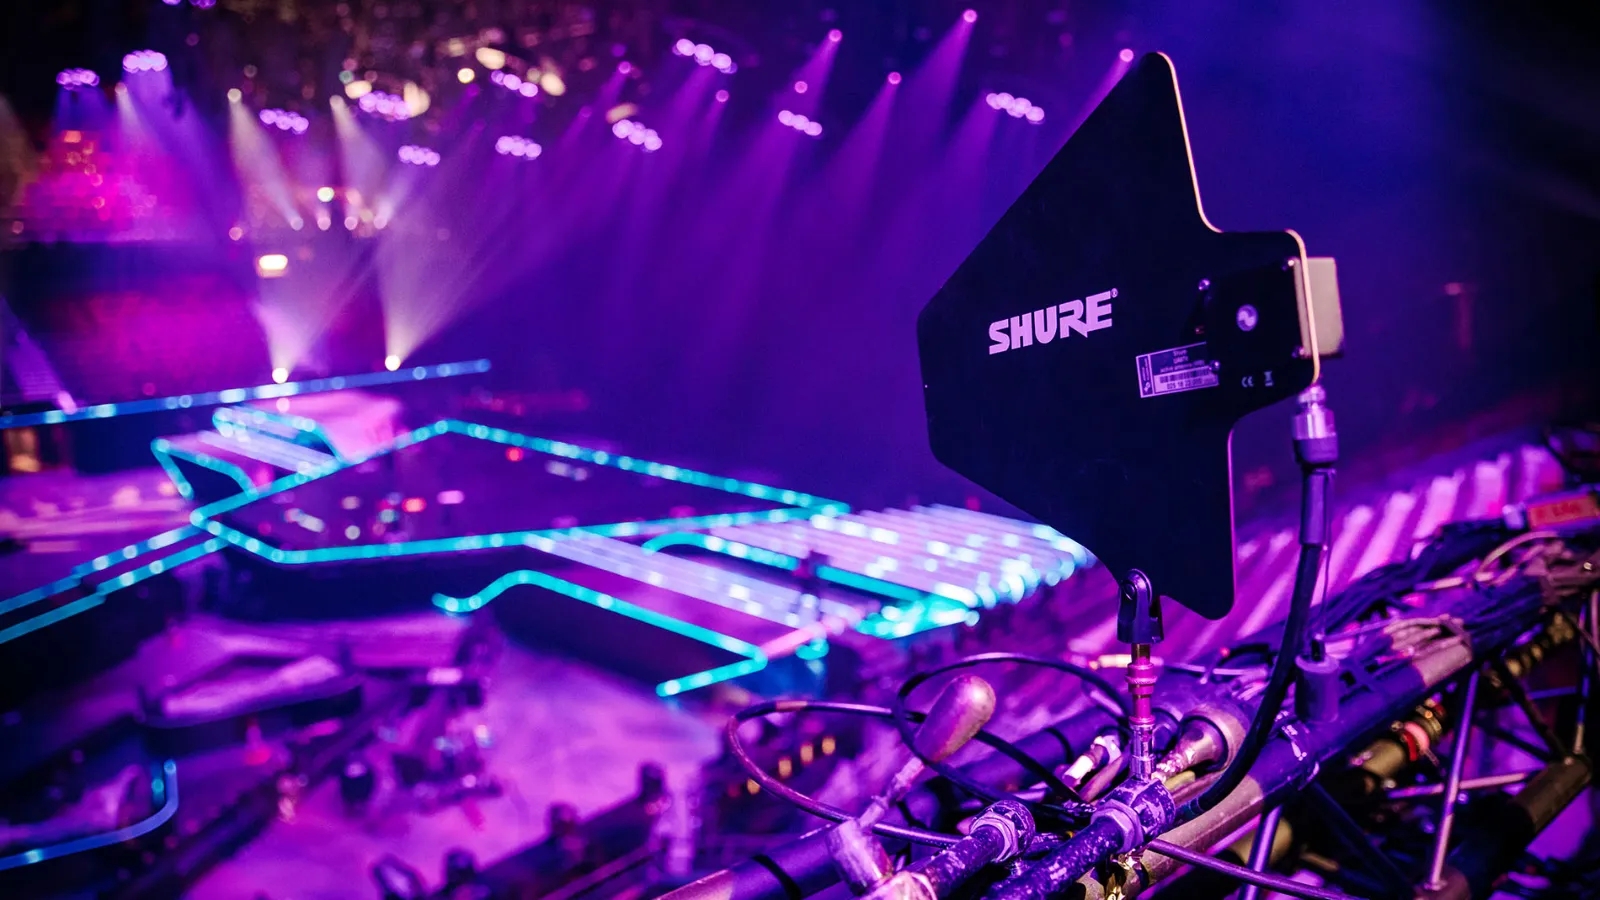 ROTTERDAM, THE NETHERLANDS - Shure at Eurovision Stage. Image: Nathan Reinds